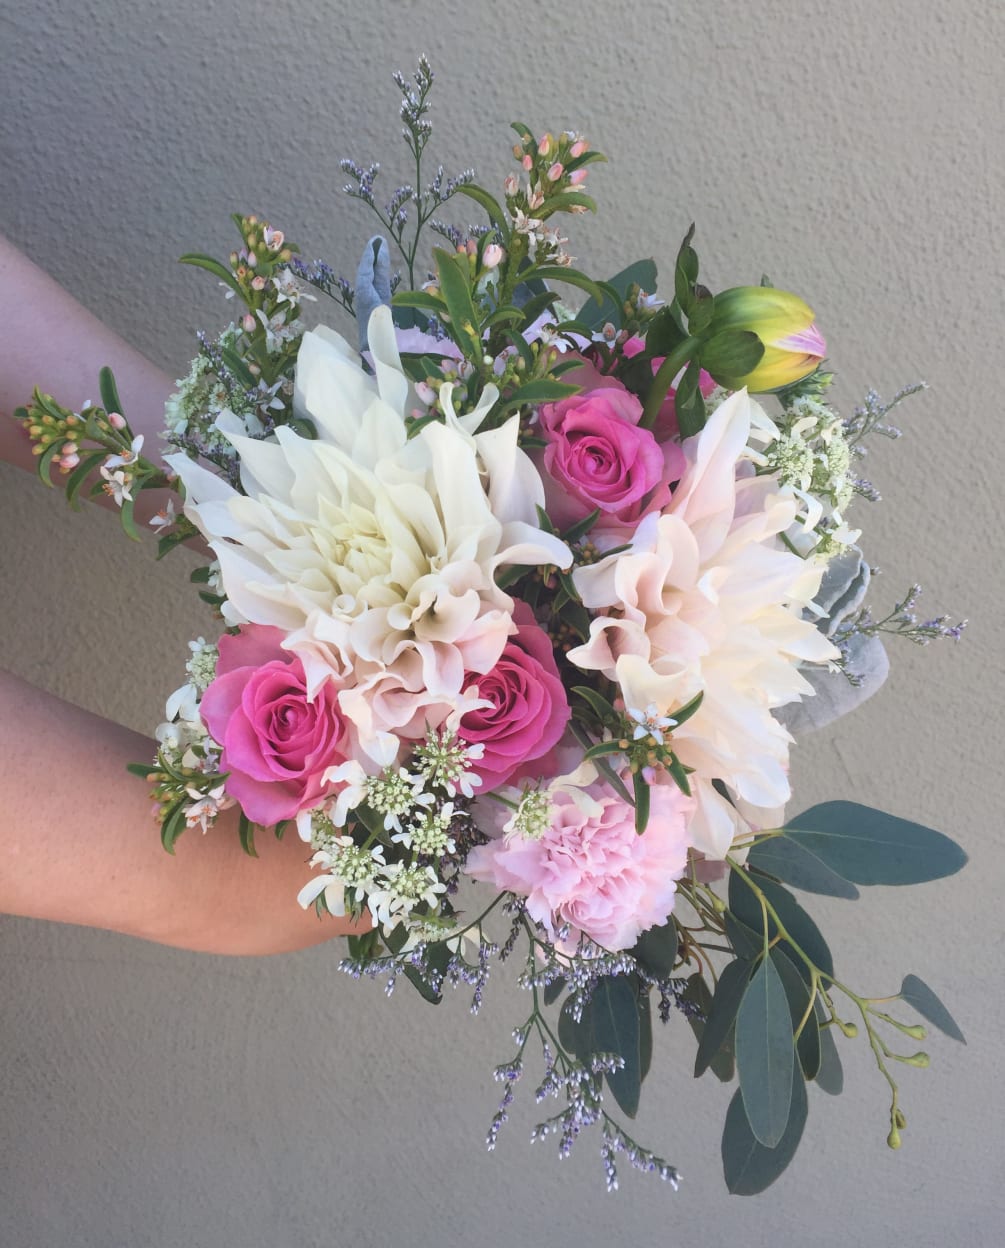 This spring bridal handtied bouquet with Dahlias, roses, carnations, greenery and filler